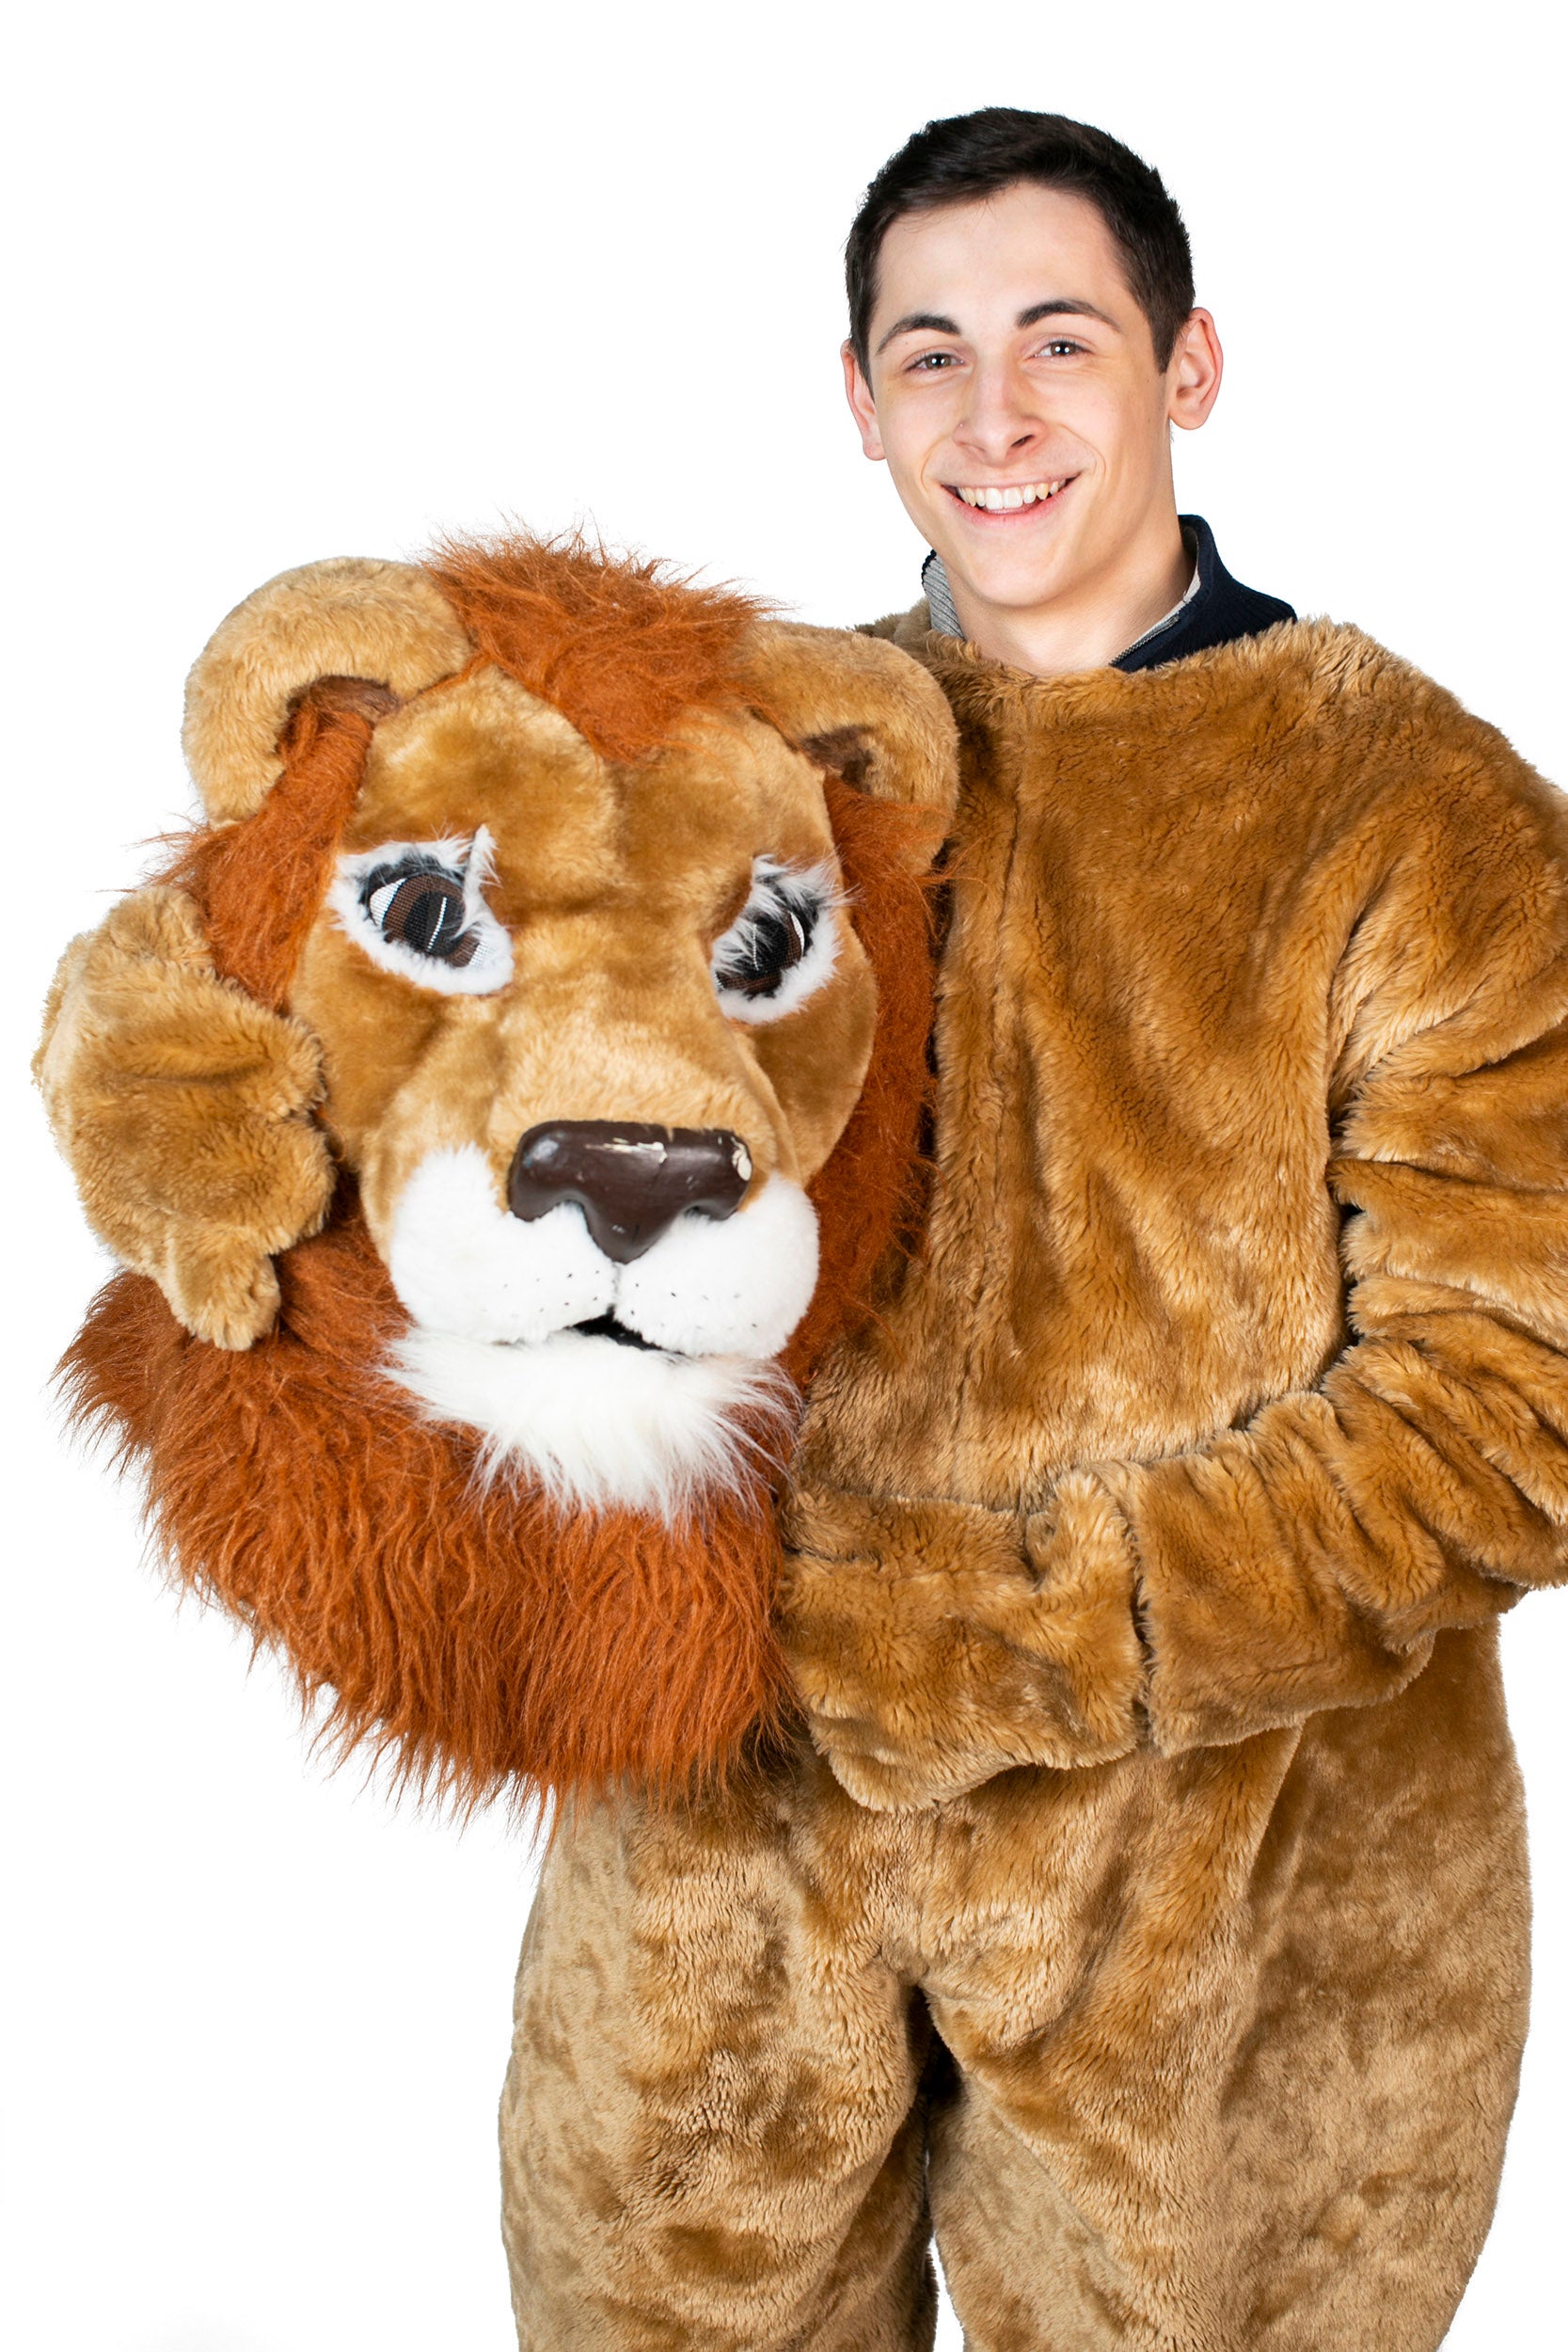 Kyle Mueller is dressed as the Lion Mascot for Winthrop House.